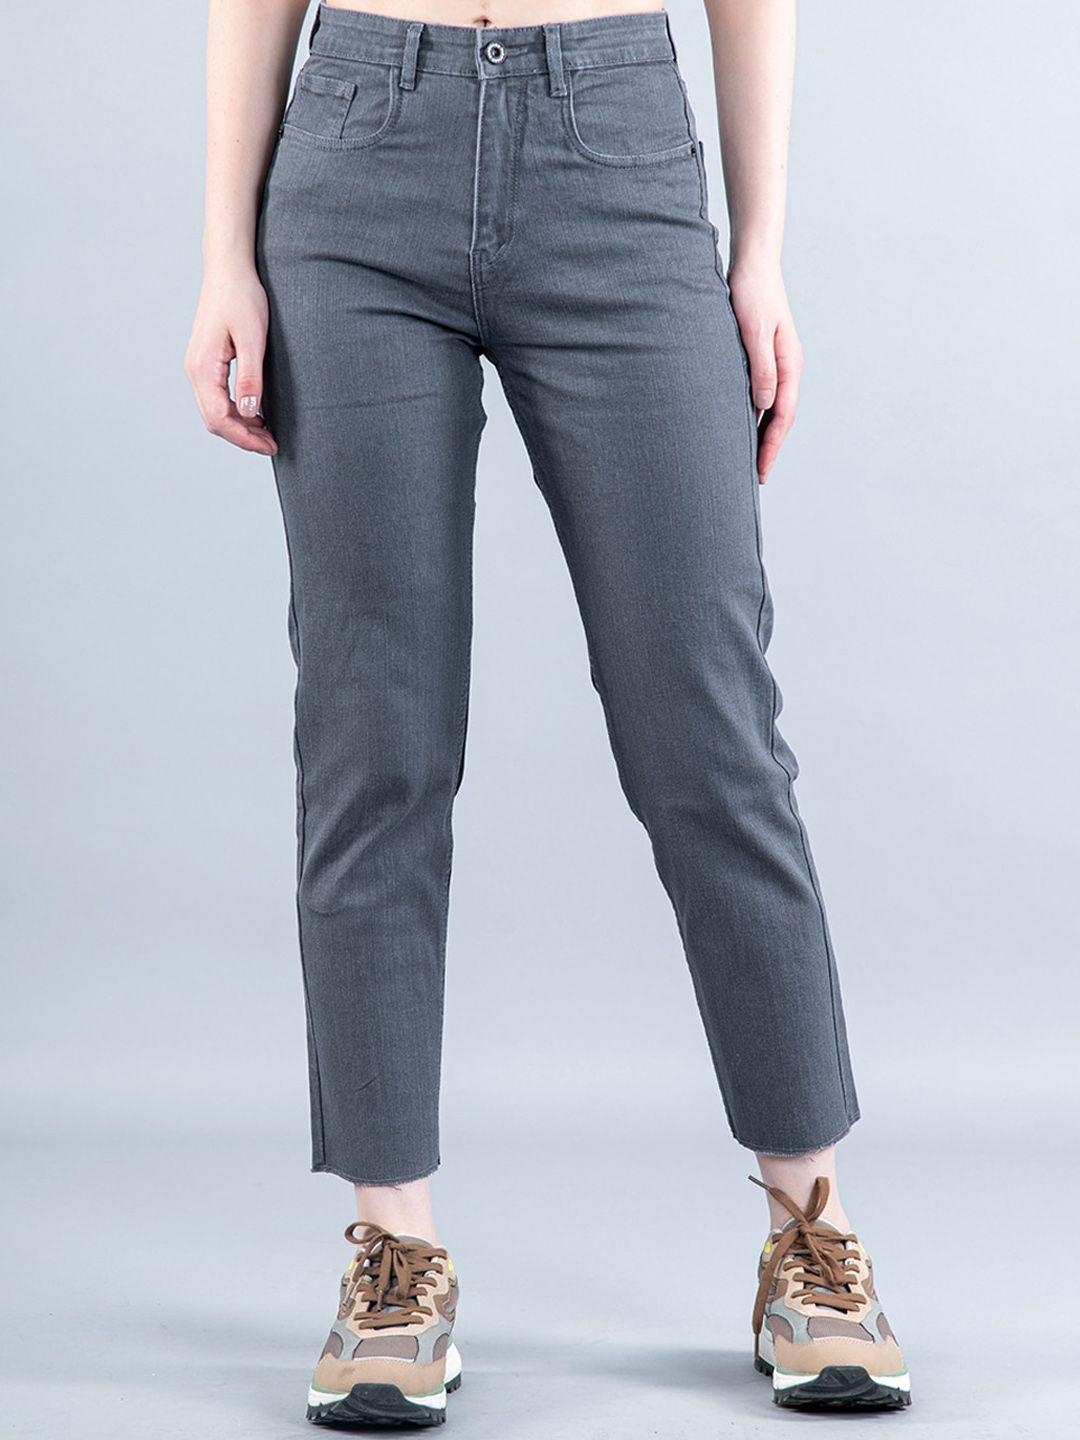 tistabene-women-grey-comfort-stretchable-jeans